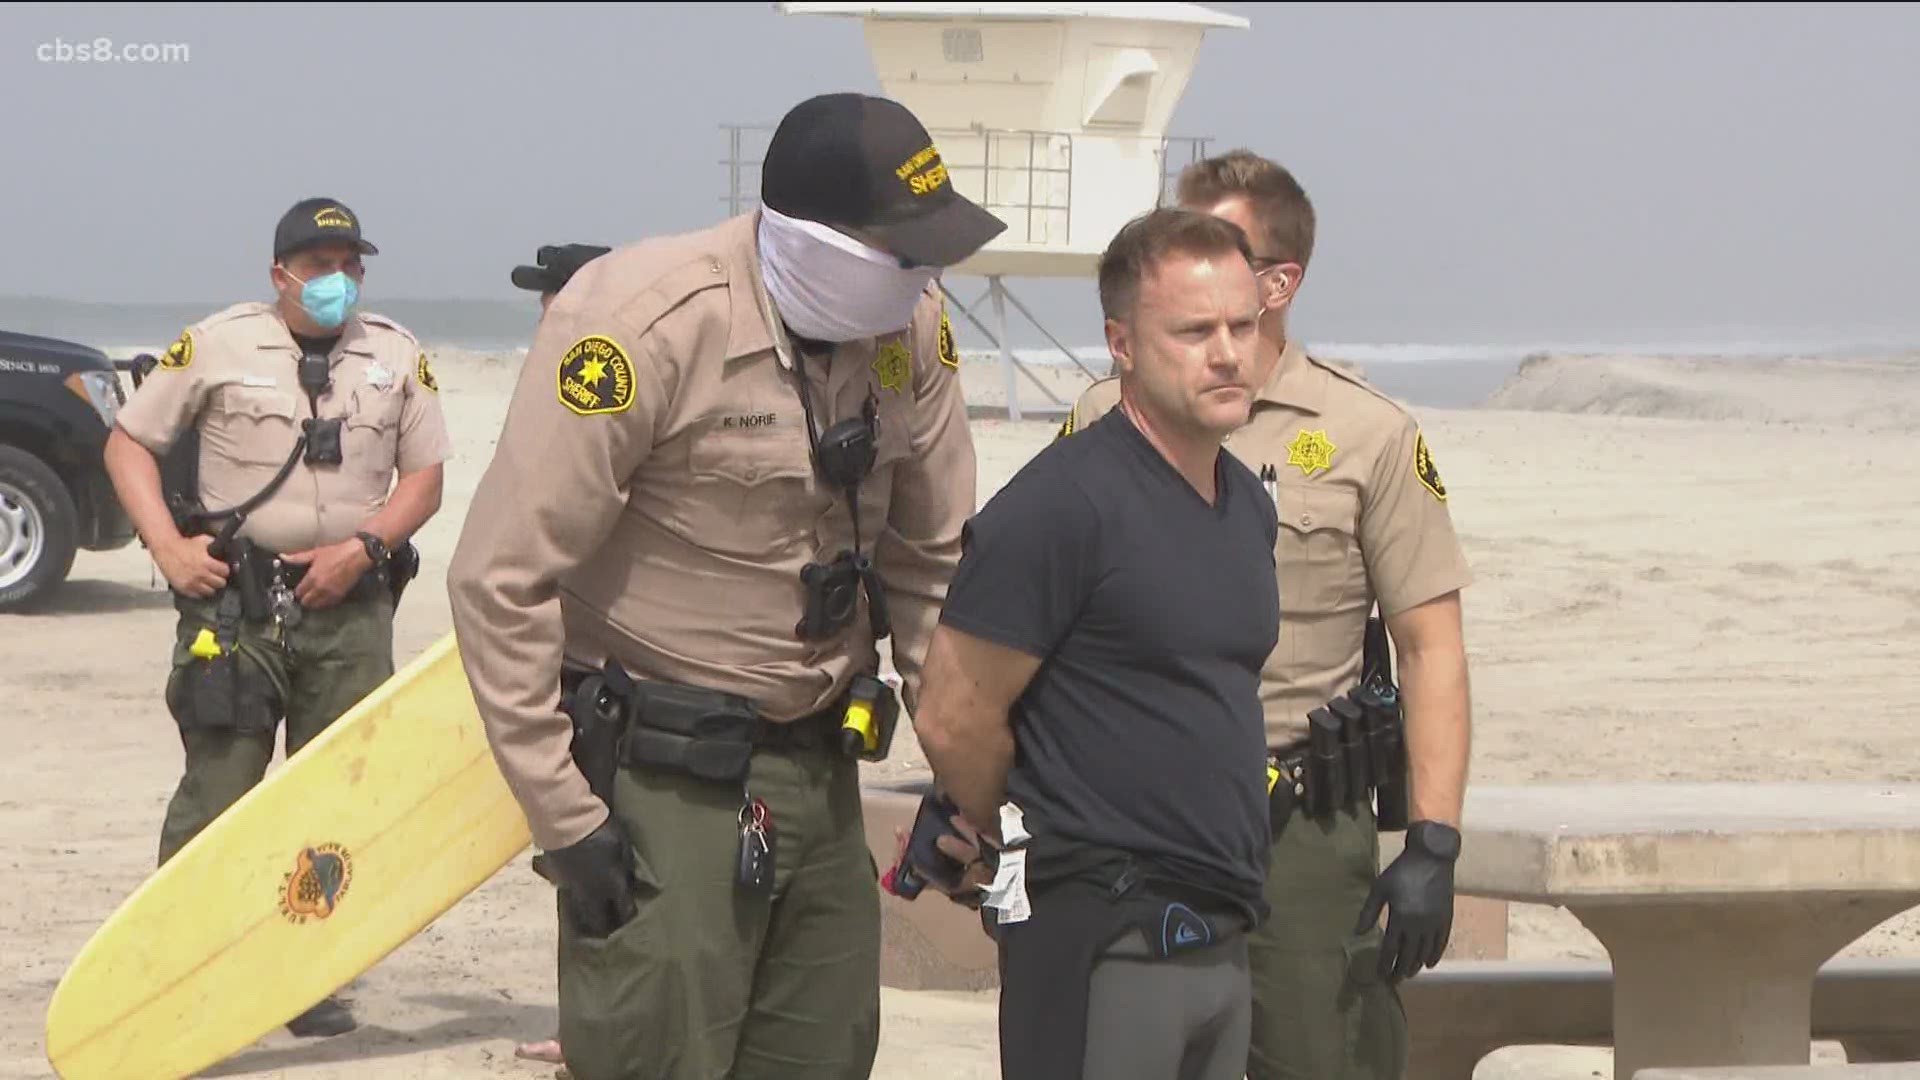 The man was among those issued a misdemeanor citation for violating the stay-at-home order and stepping foot onto a closed beach.